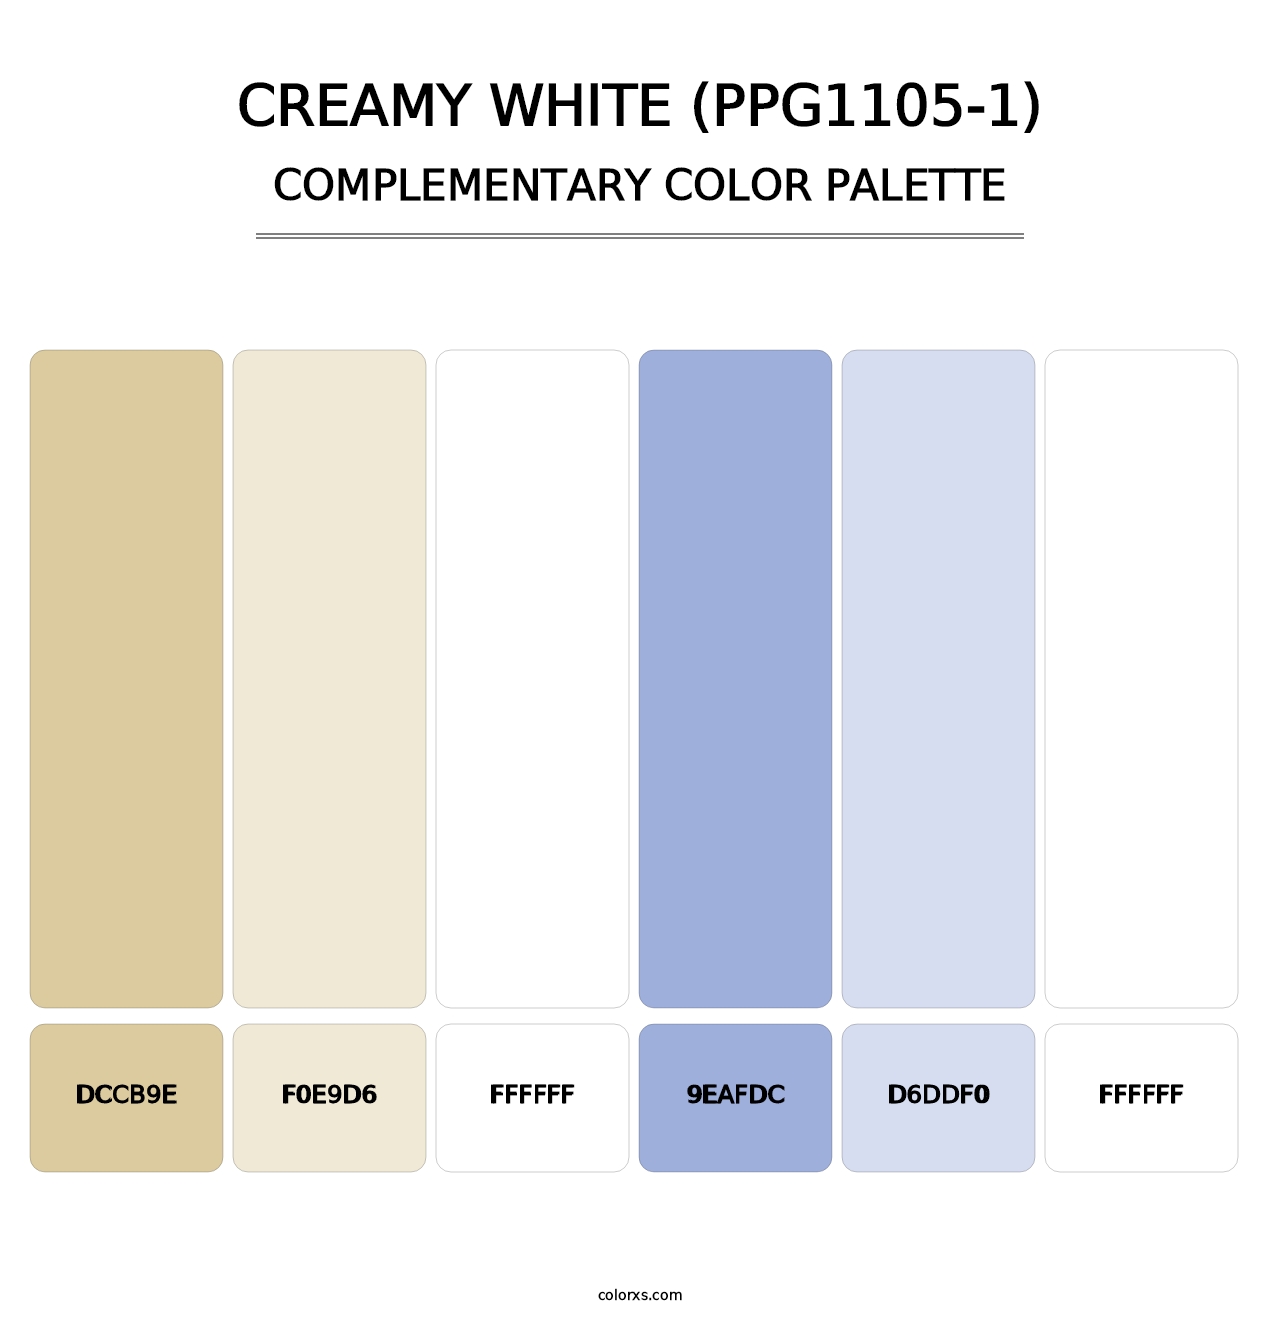 Creamy White (PPG1105-1) - Complementary Color Palette